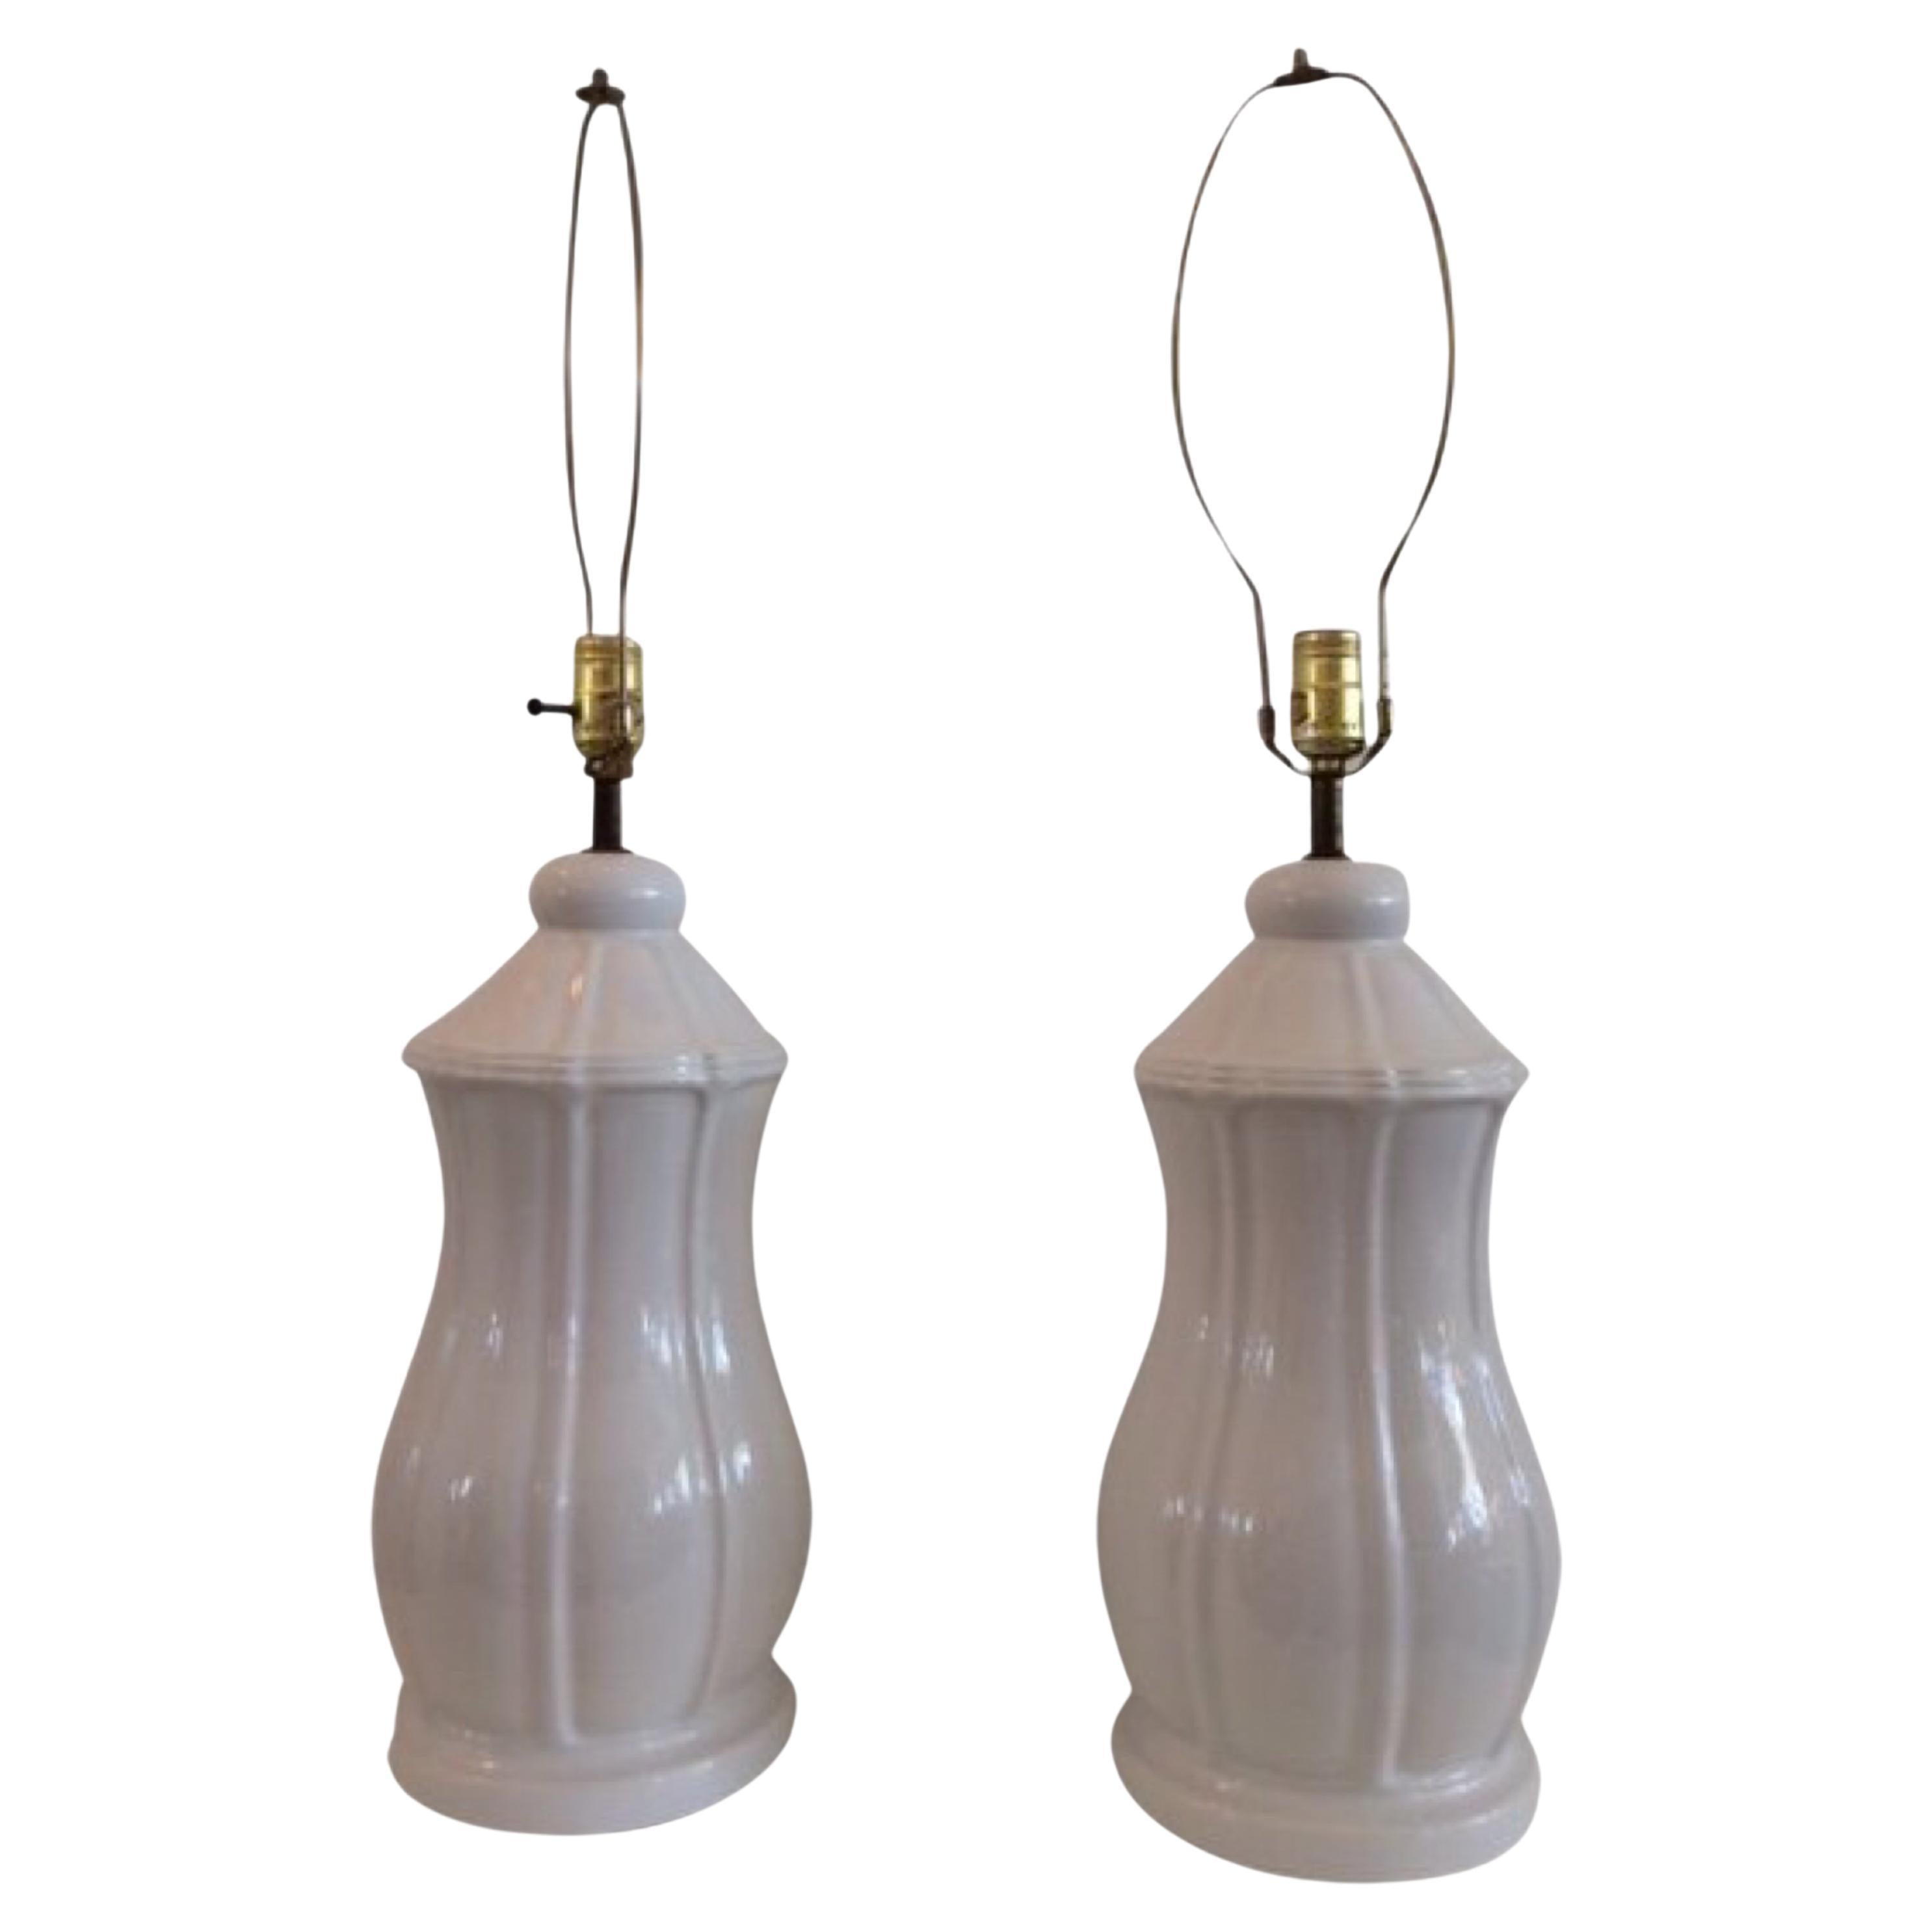 Vintage Hollywood Regency Blanc Pottery Table Lamps, a Pair For Sale